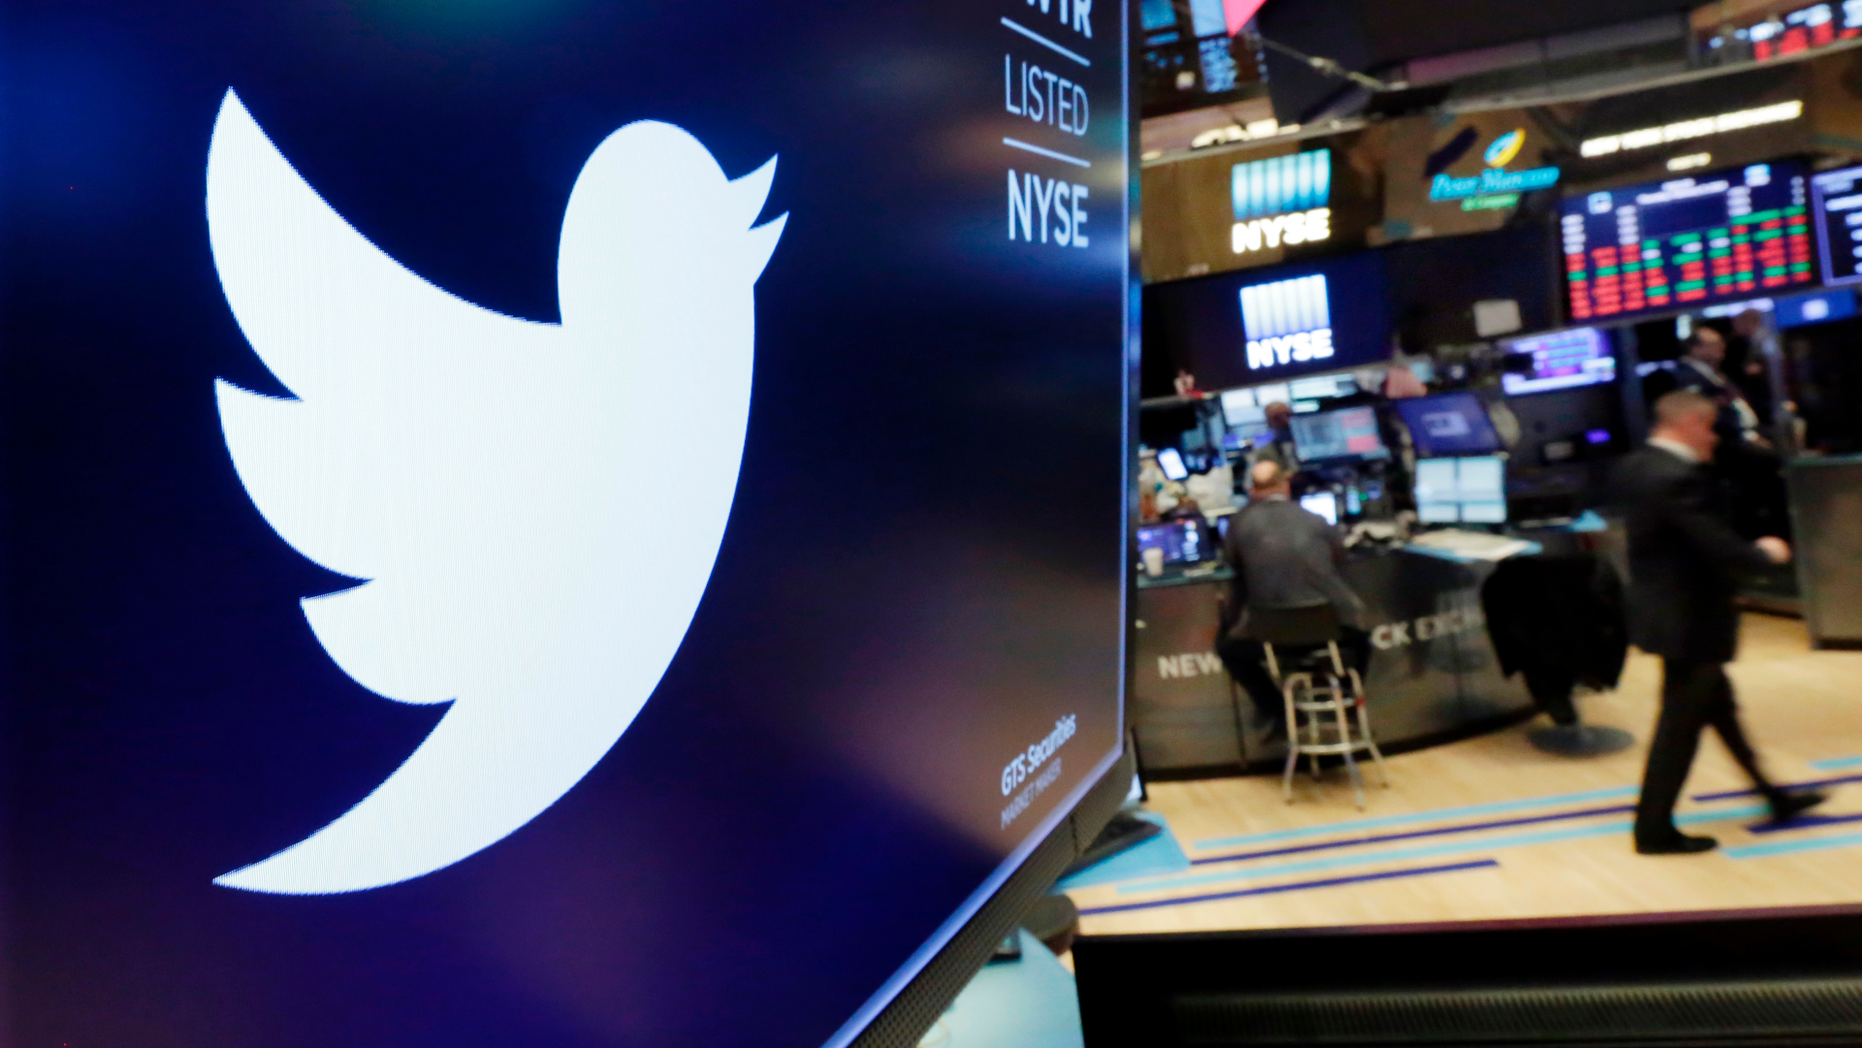 FILE - In this Feb. 8, 2018, record photo, a trademark for Twitter is displayed above a trade post on a building of a New York Stock Exchange. (AP Photo/Richard Drew, File)